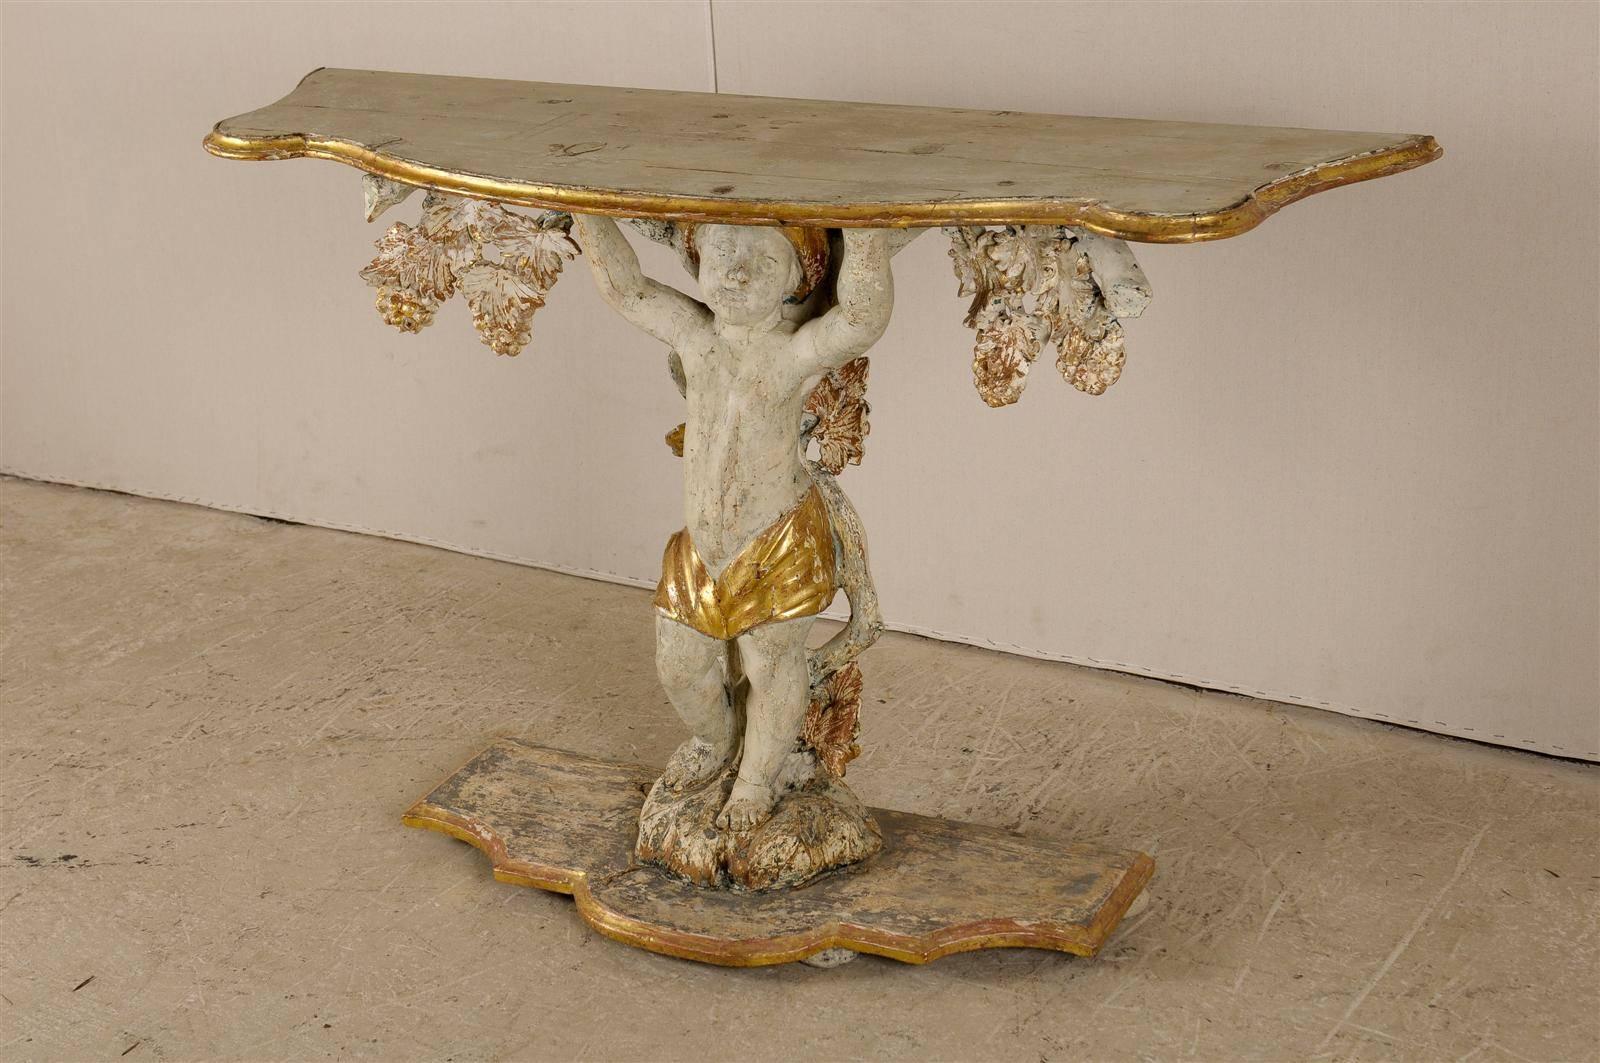 Gilt An Exquisite Italian 18th C. Putto Console with Gilded Wood and Grapevine Motif